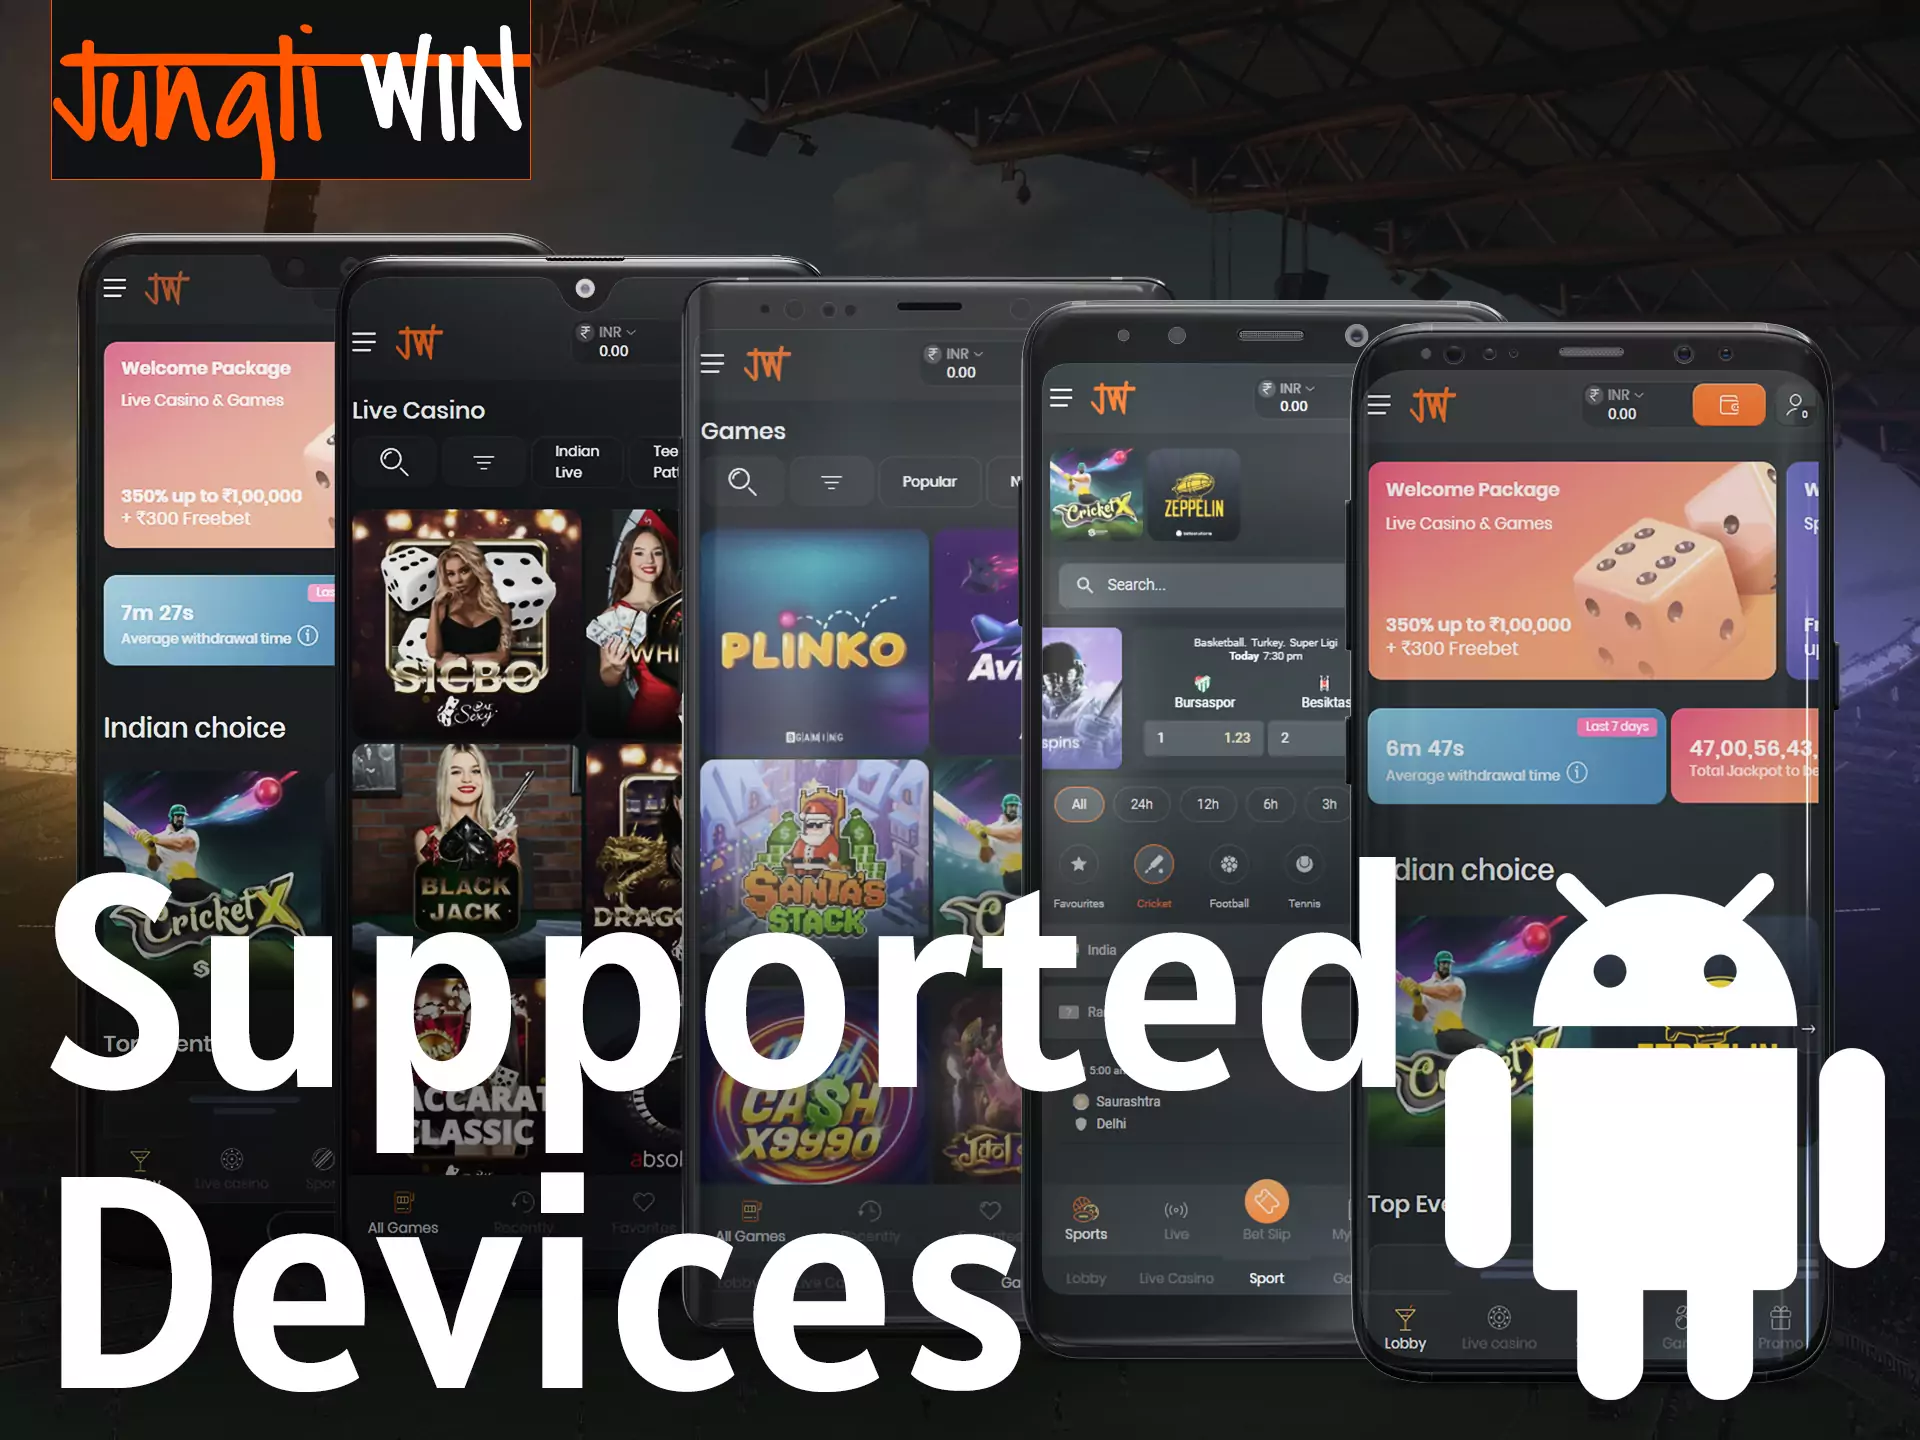 The Jungliwin application supports many models of Android devices.